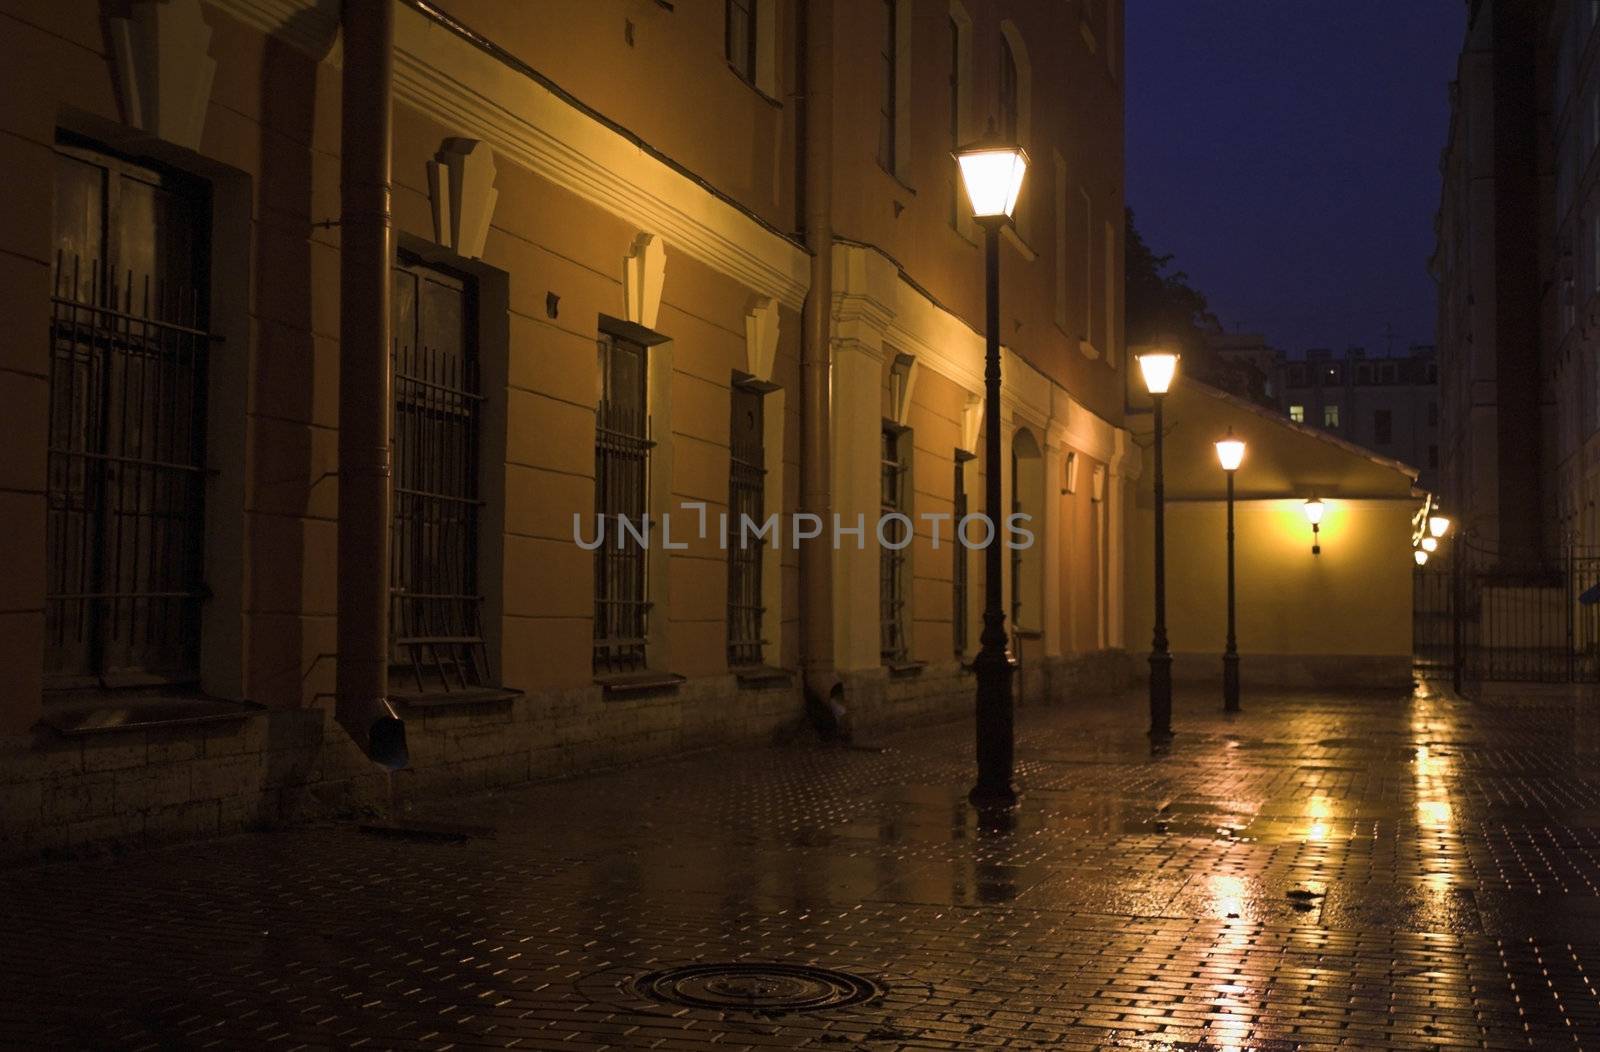 Yard with street lamps and stone pavement at evening in Saint Petersburg, Russia.